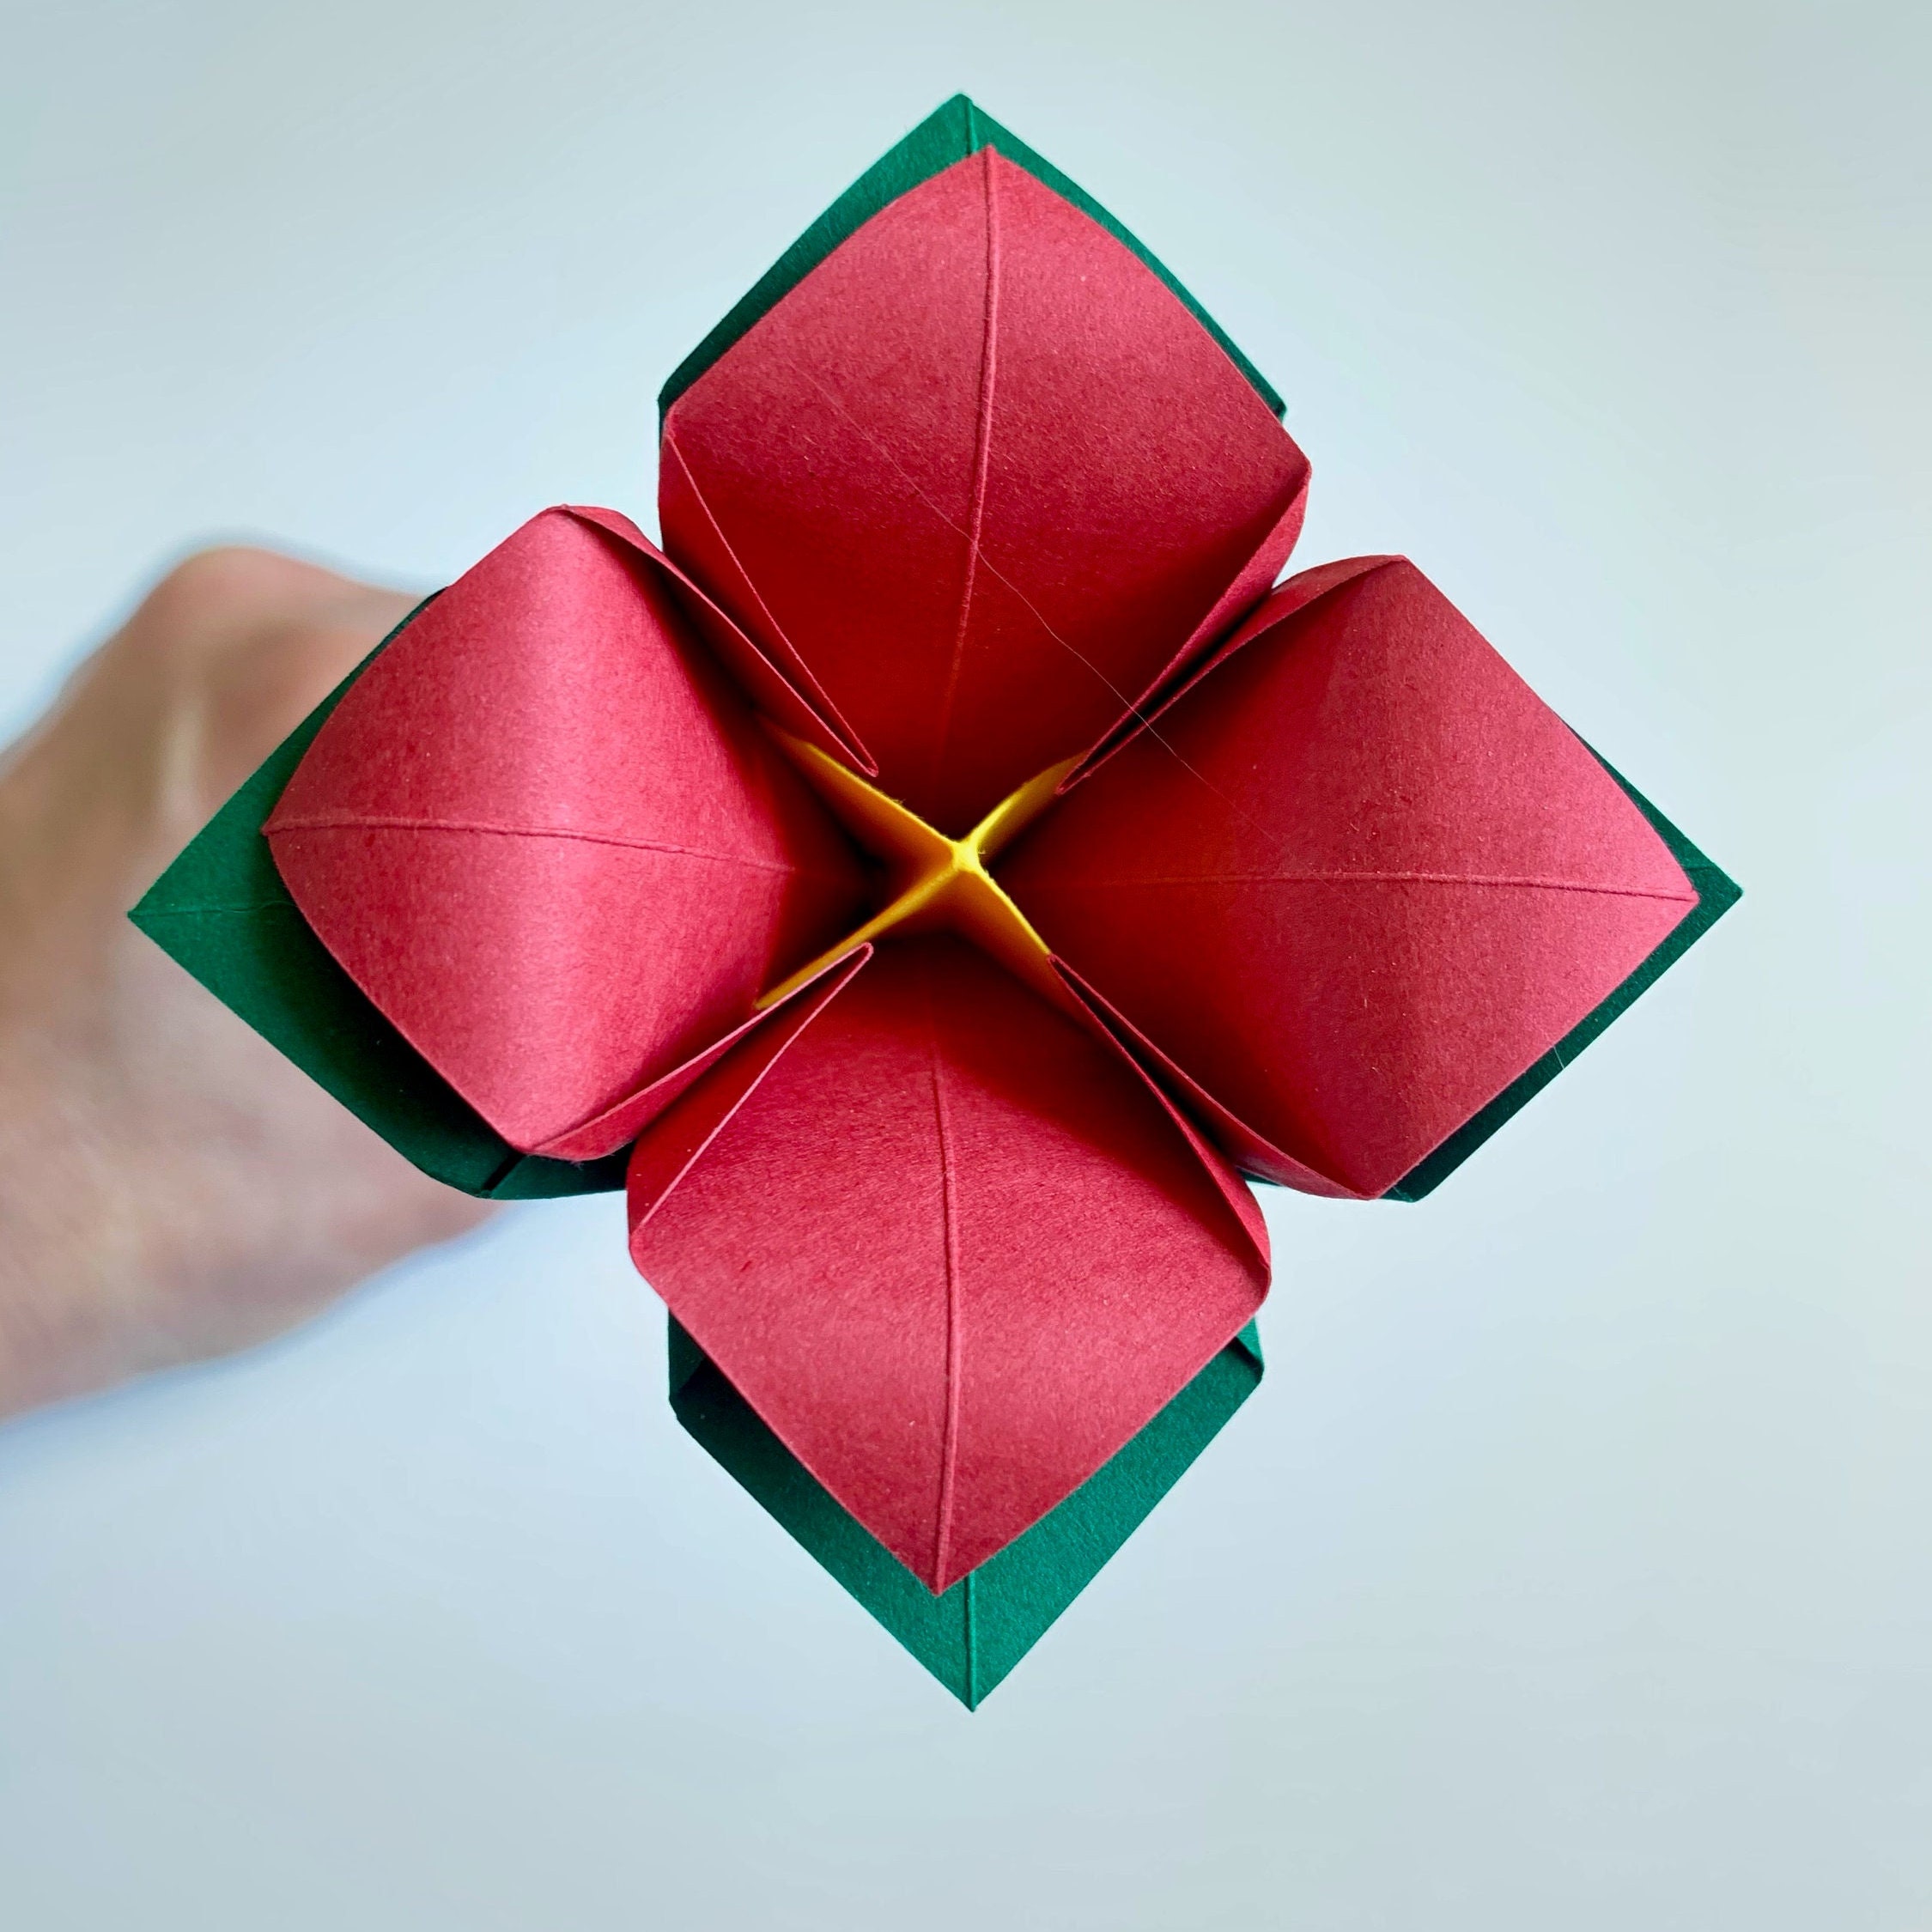 15+ Origami DIY Kits to Help You Master the Ancient Art of Paper-Folding